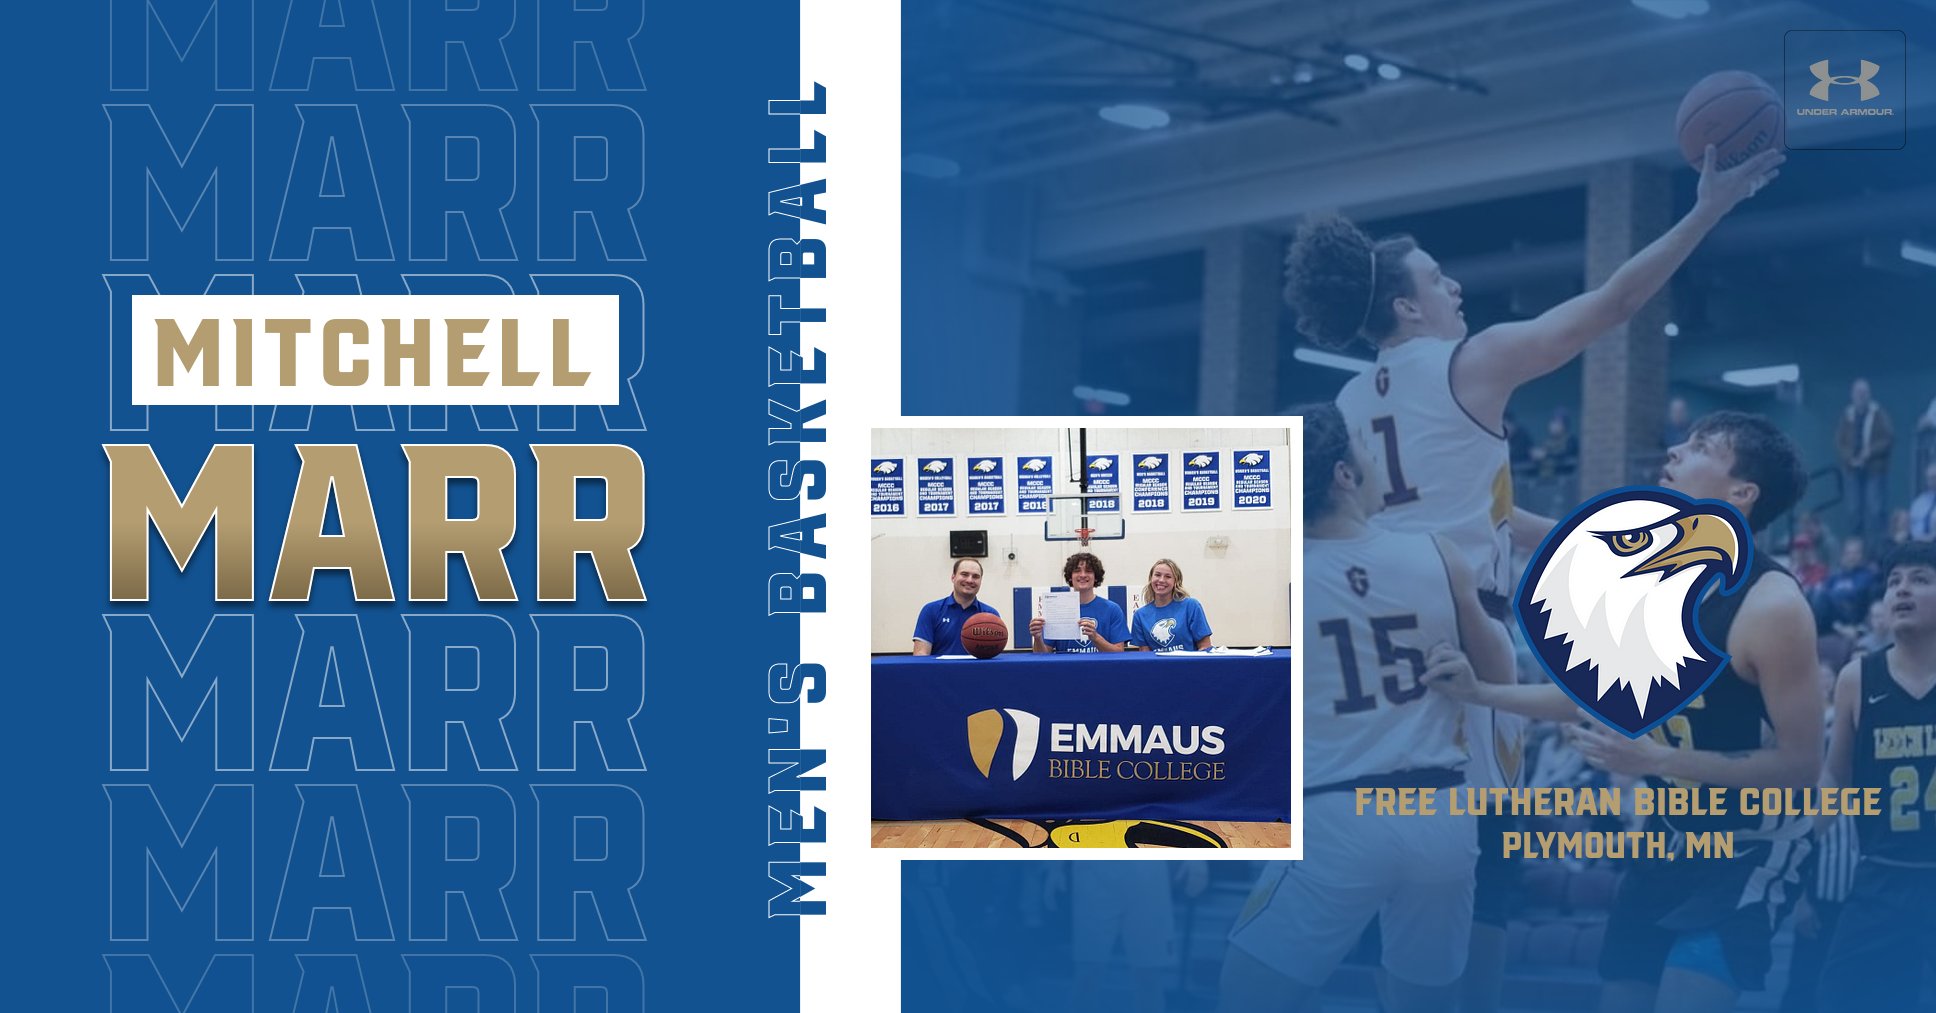 Eagles Basketball Signs Marr